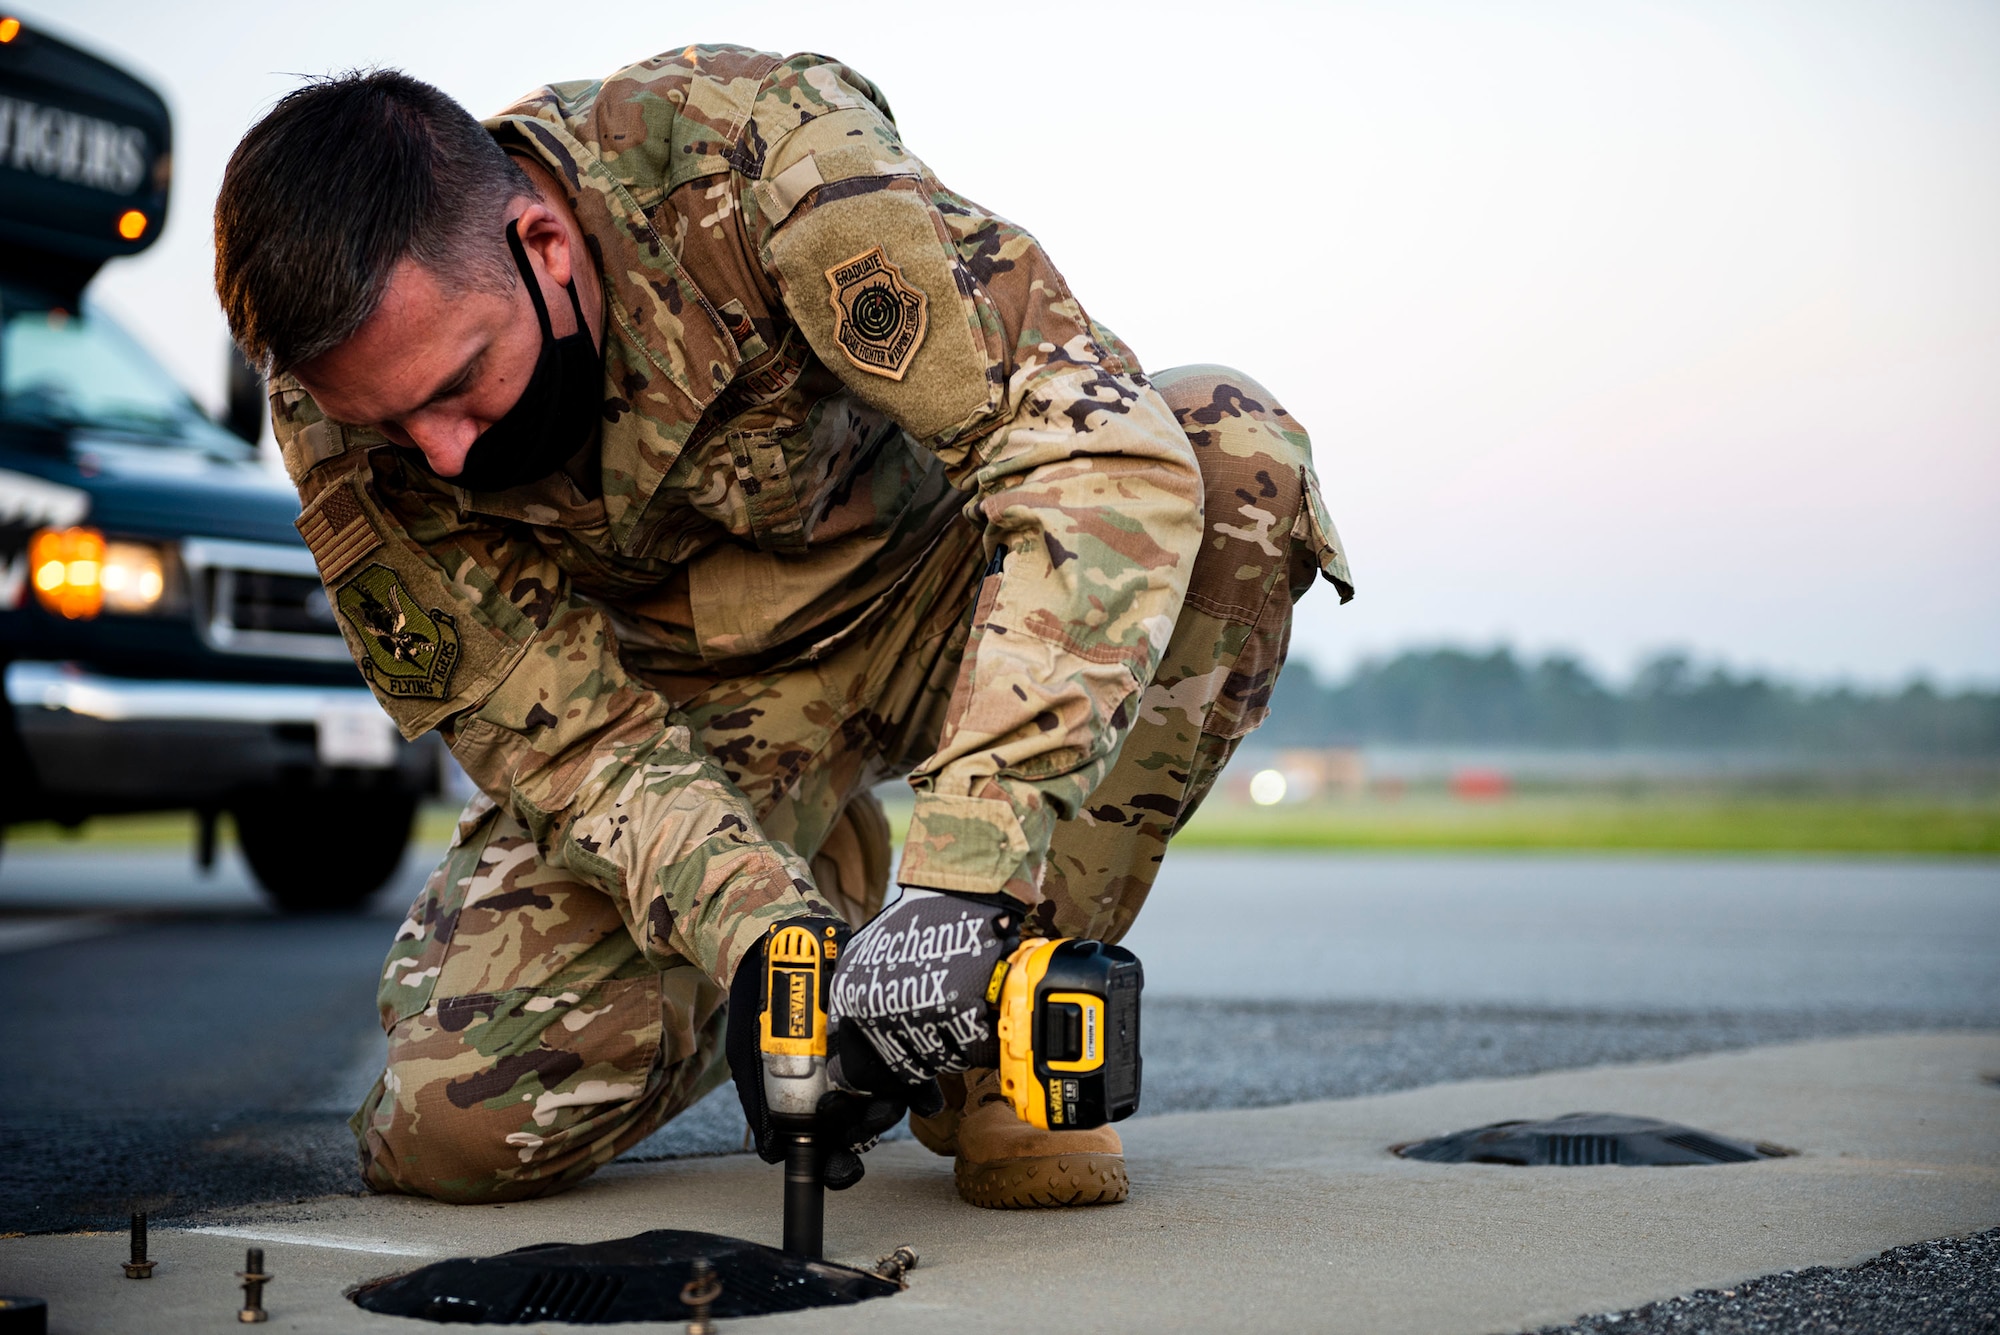 Photo of commander replacing an airfield light.